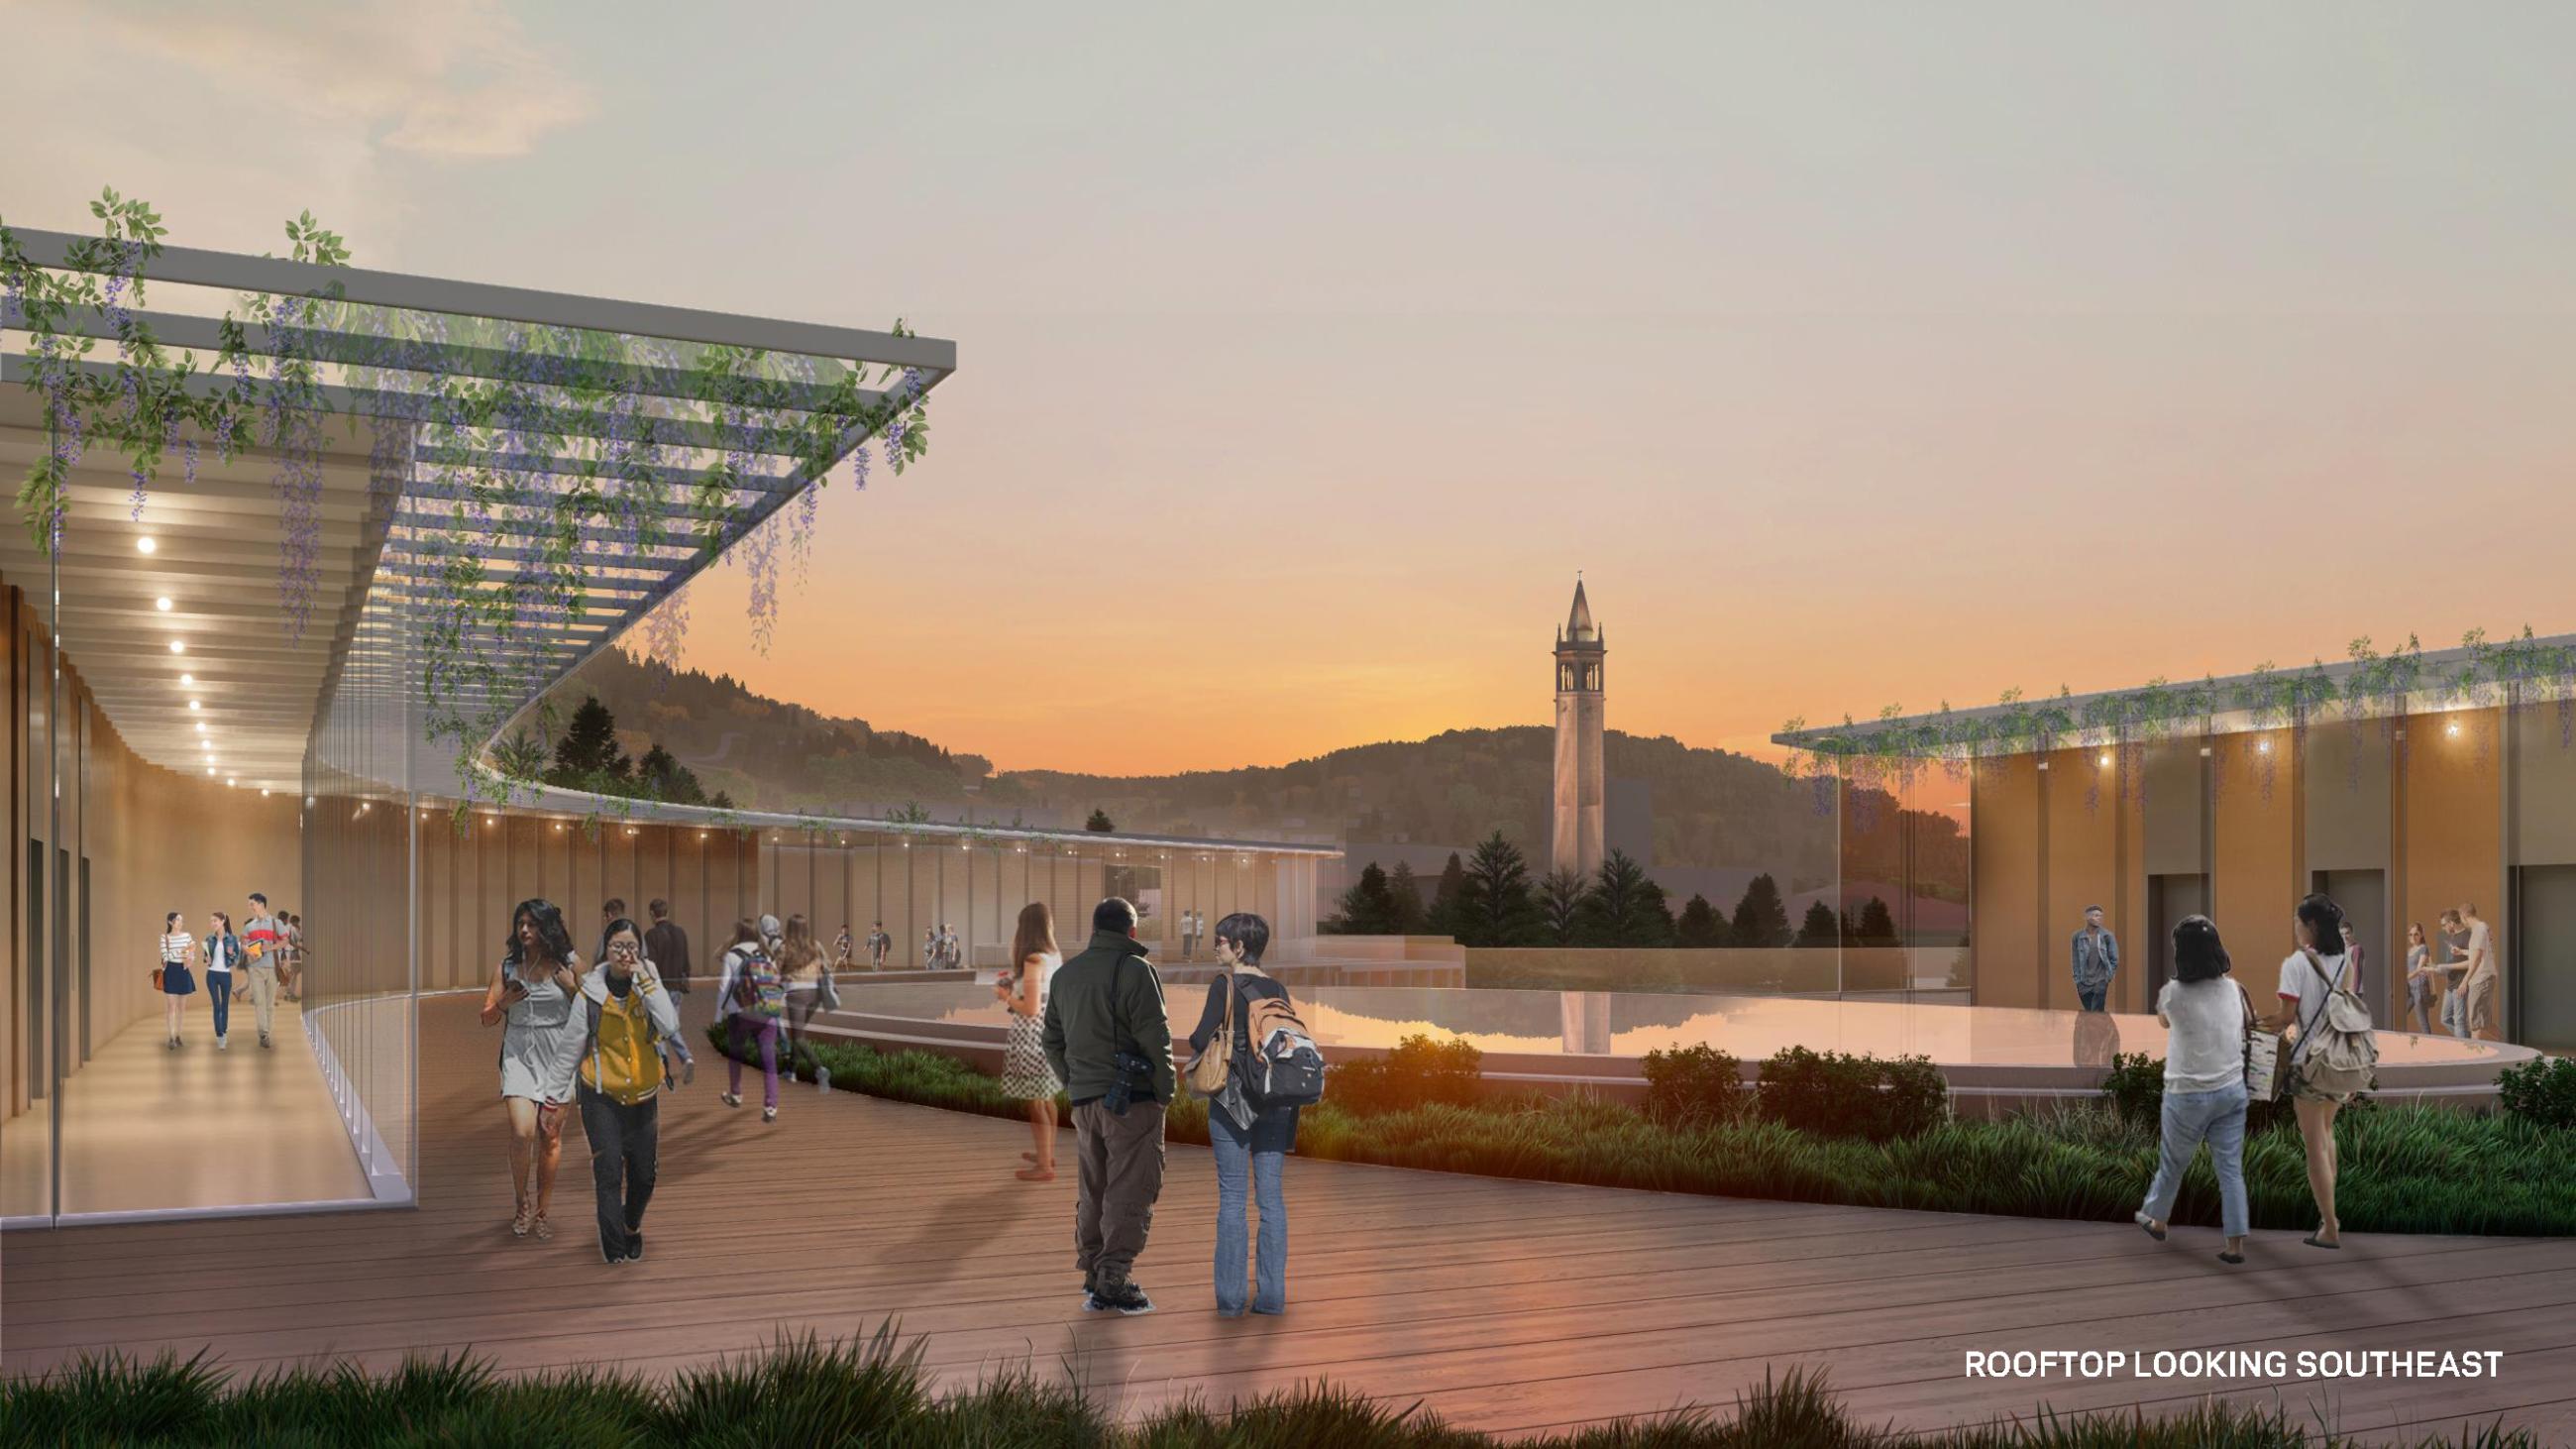 The Gateway's rooftop terrace with a view of Sather Tower and the Berkeley Hills. (Rendering by Weiss/Manfredi architecture firm)